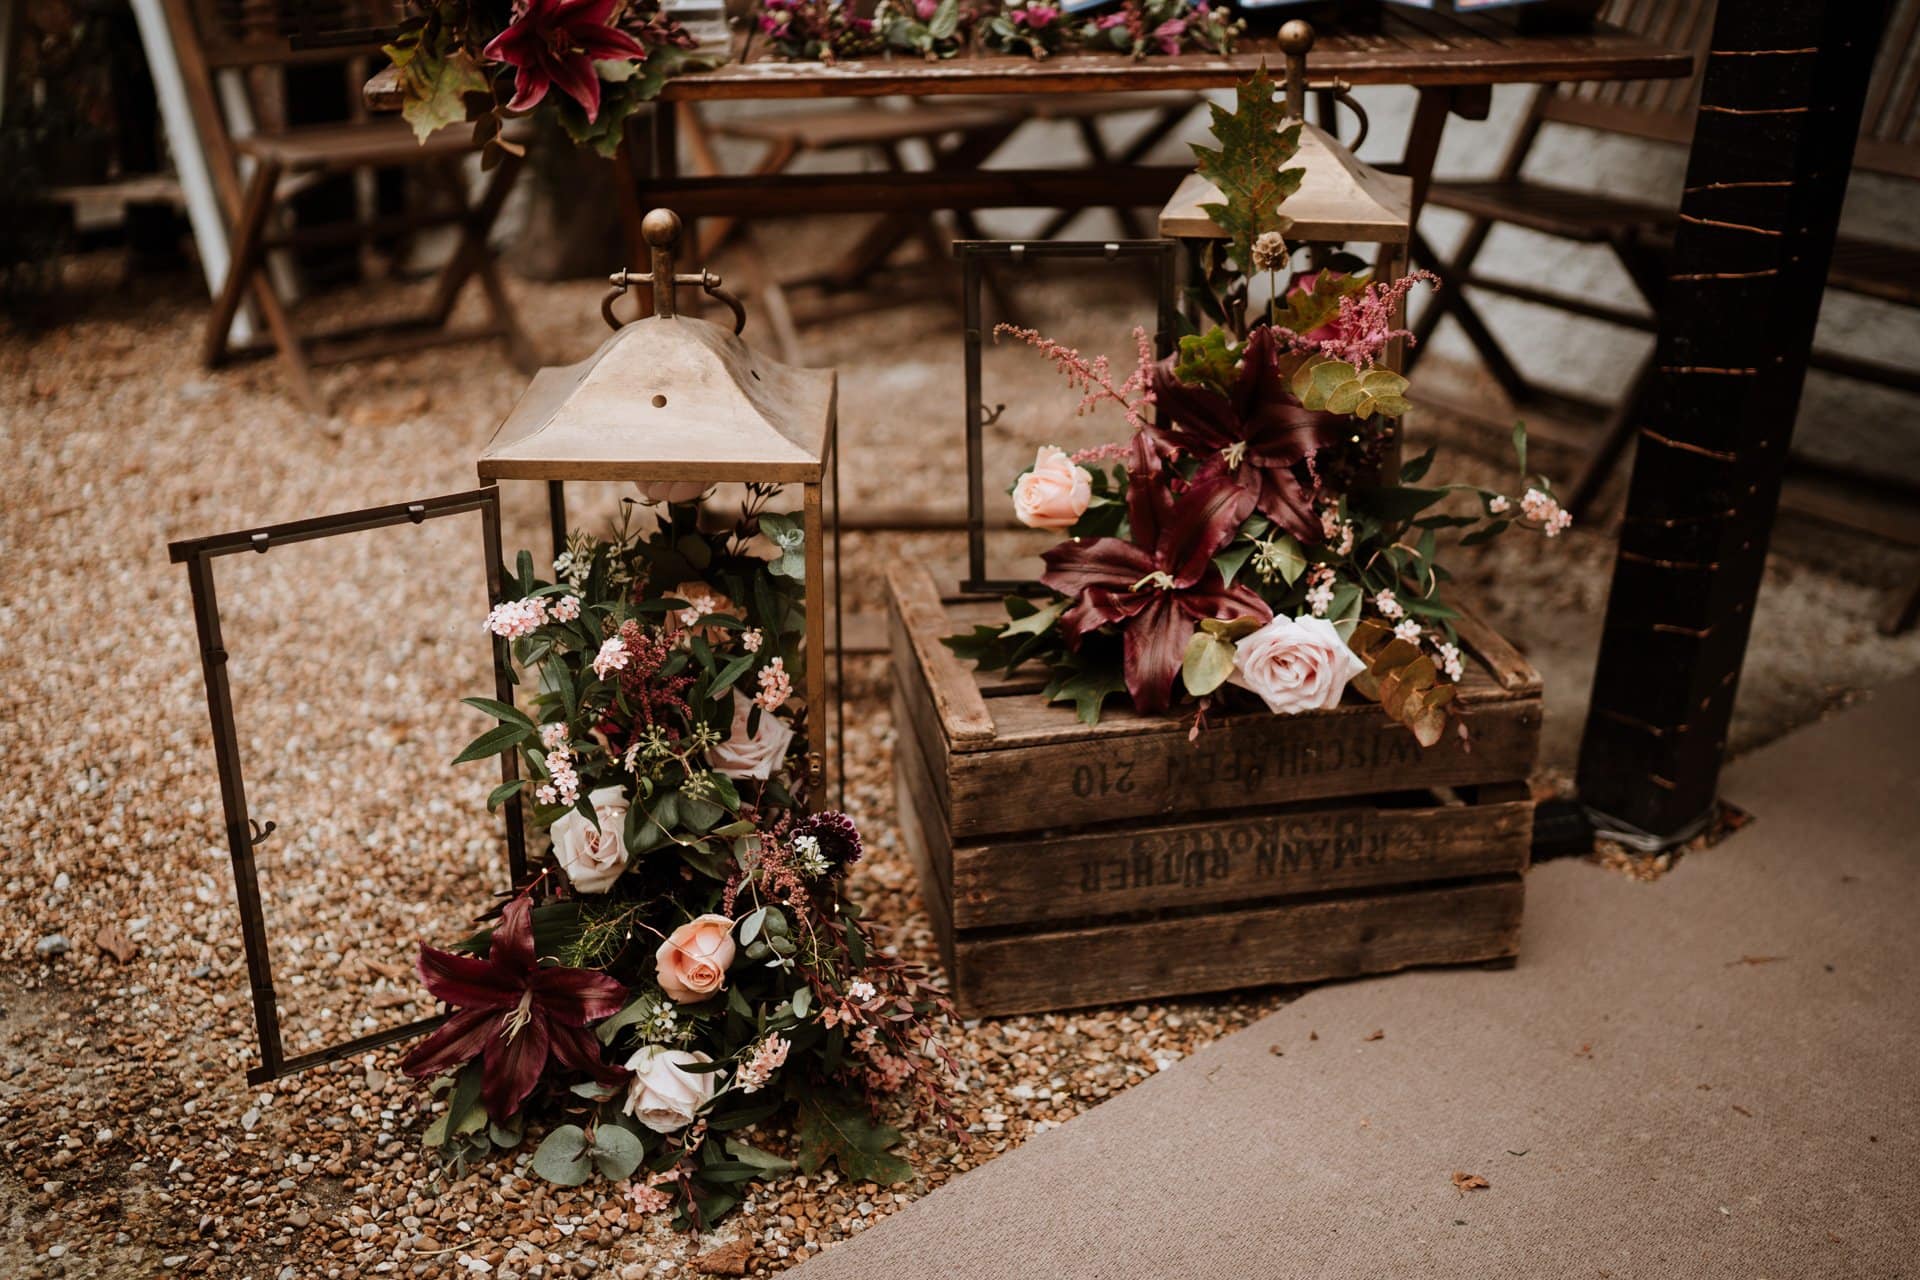 Glass lanterns with the door open with burgundy and blush pink flowers overflowing out next to rustic wooden crate adorned with more flowers